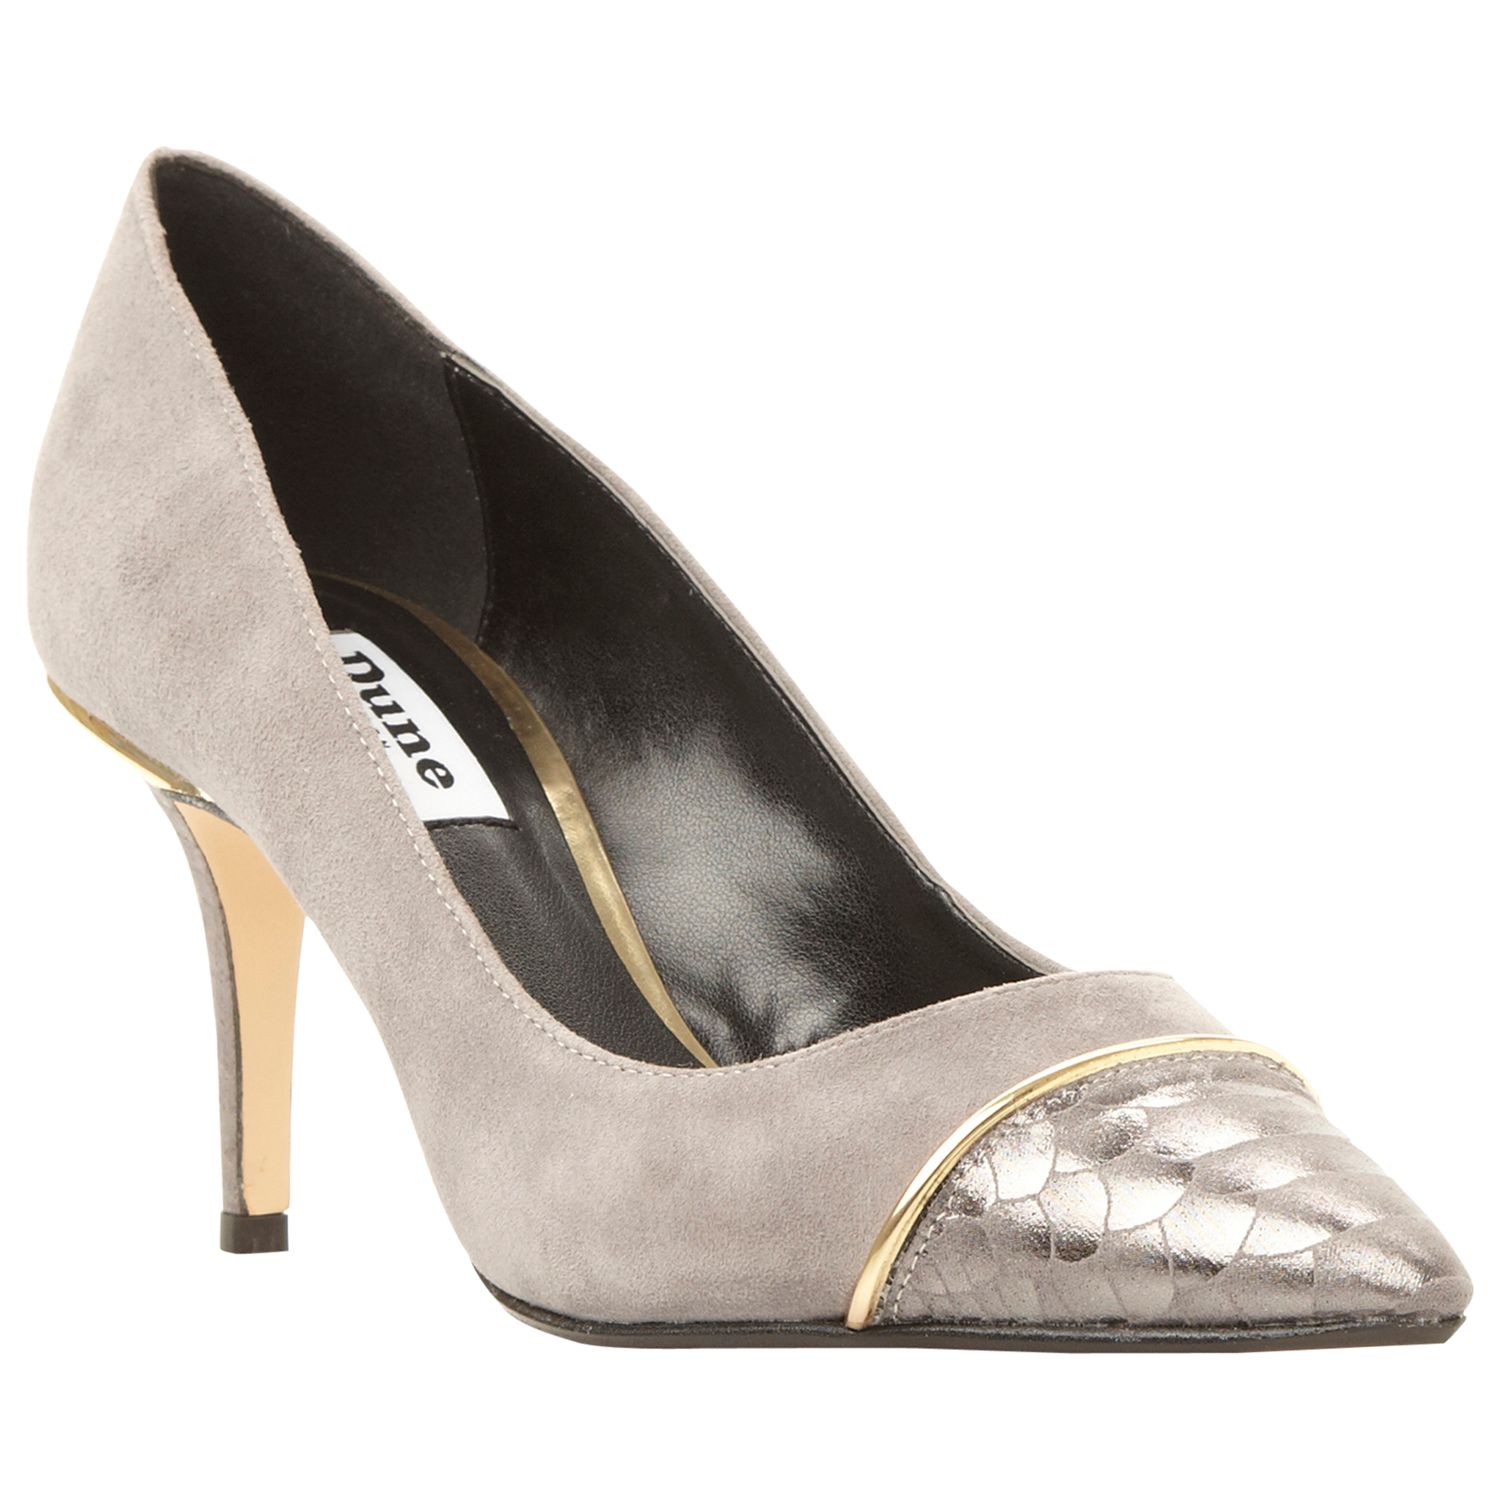 Dune Bellina Stiletto Heeled Court Shoes, Grey Suede